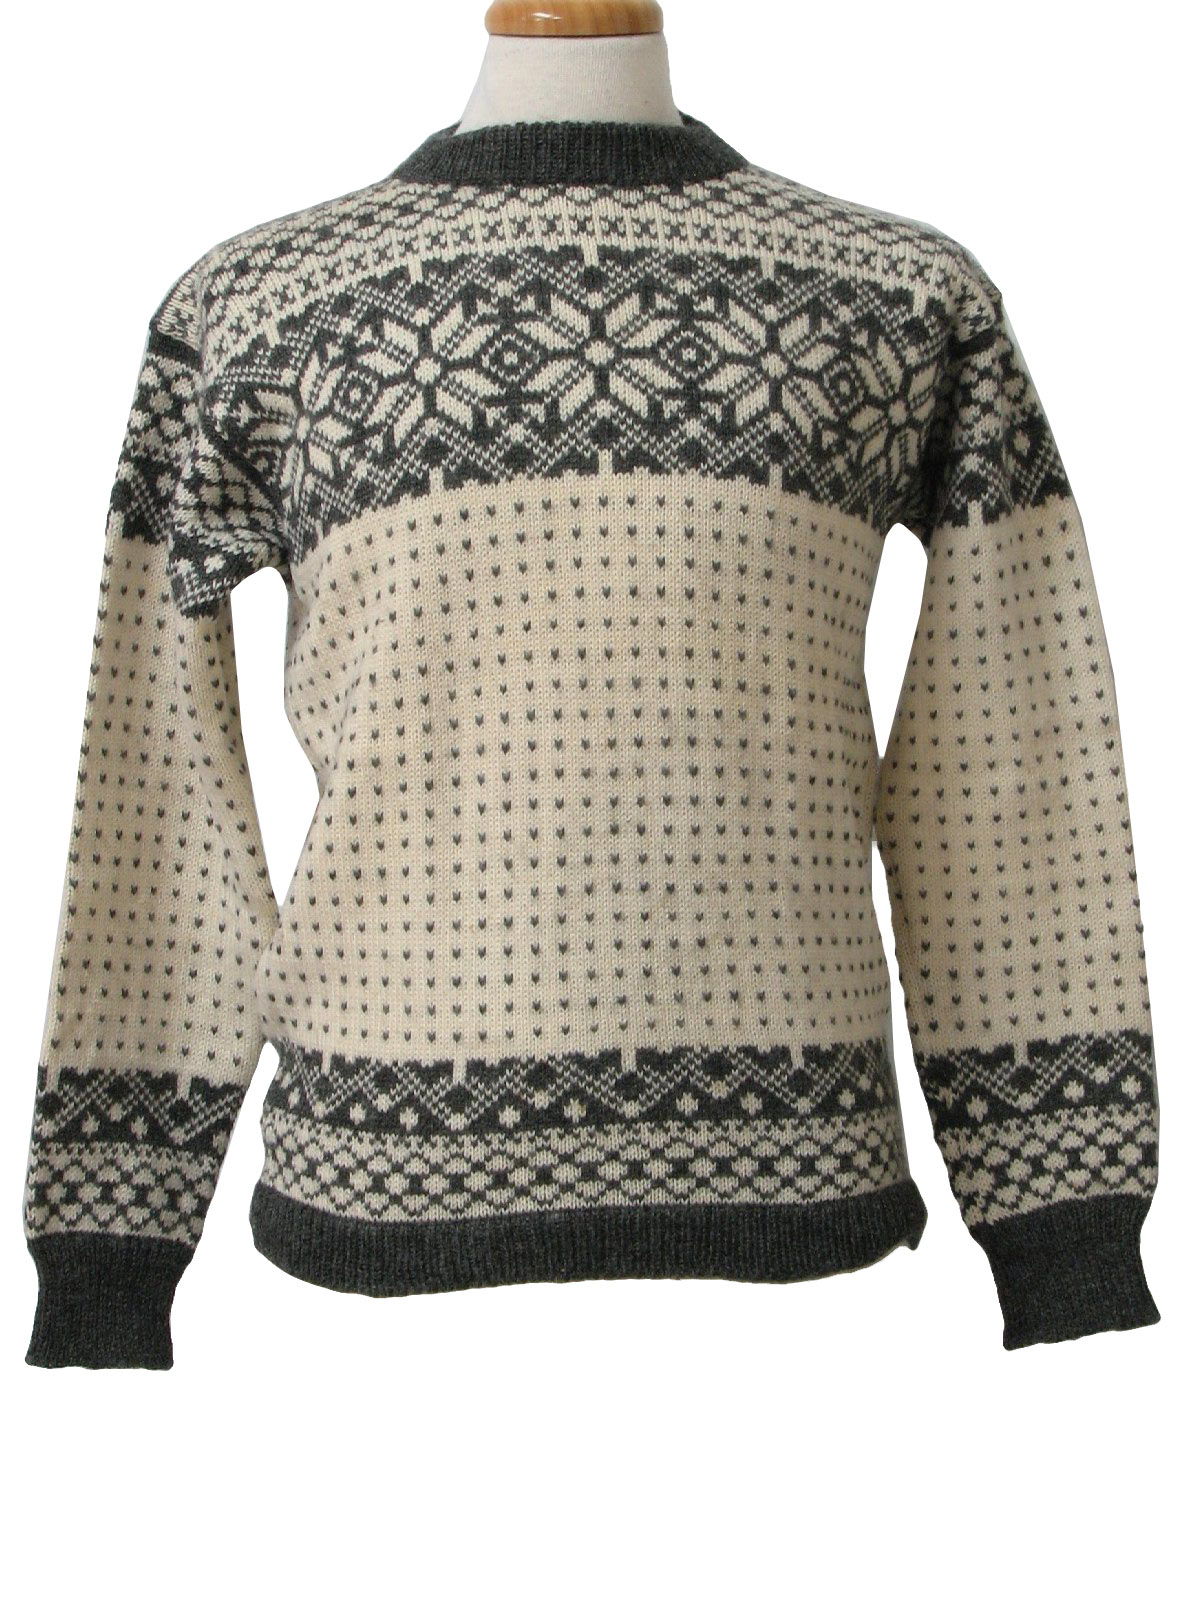 1970s Vintage Sweater: 70s -Viking Knit- Mens grey and off white ...